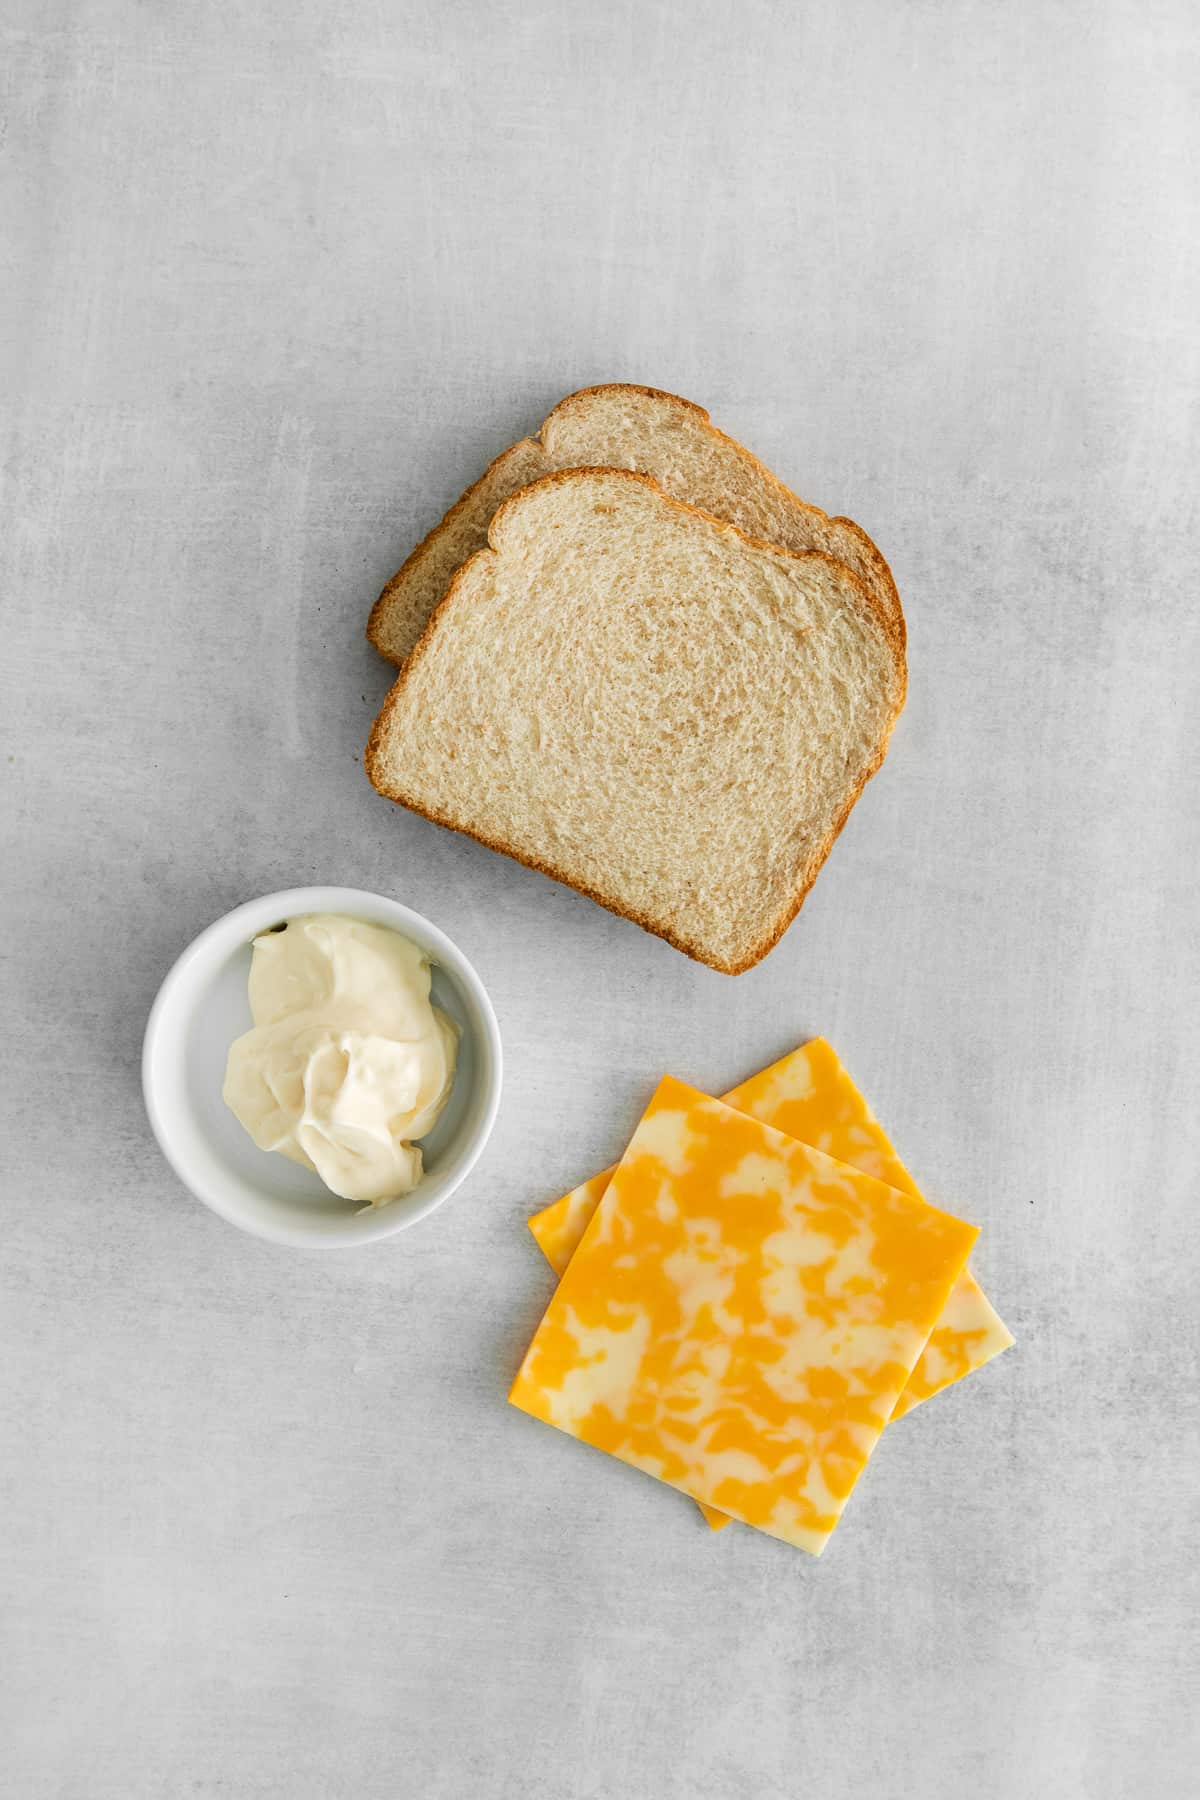 Ingredients for grilled cheese with mayo on a plate.